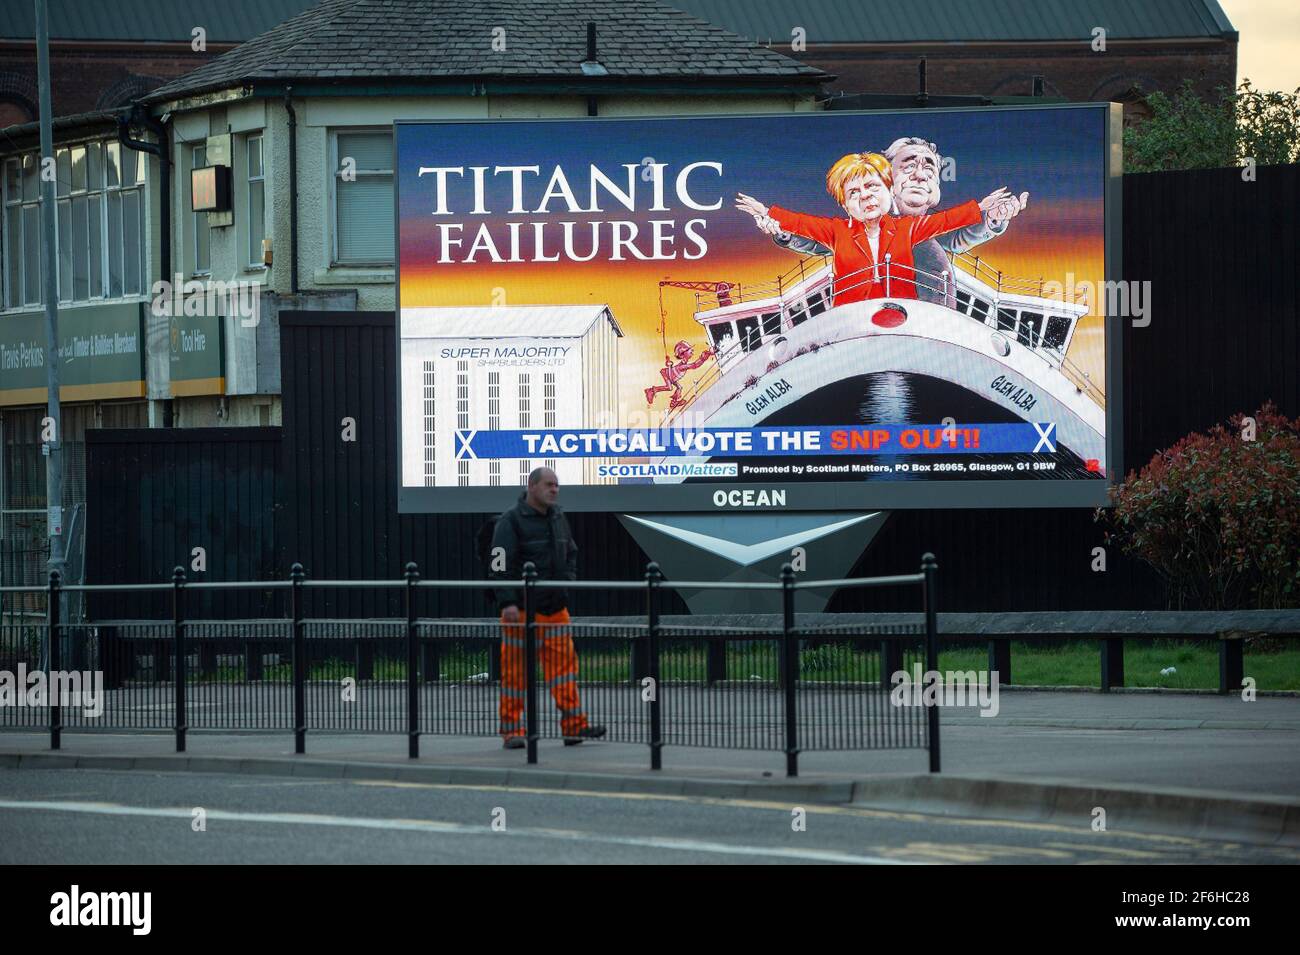 Glasgow, Scotland, UK. 1 April 2021. PICTURED: A giant electronic billboard displaying an artwork graphic with the title, “TITANIC FAILURES” and “TACTICAL VOTEE THE SNP OUT” with cartoon characters of Nicola Sturgeon and Alex Salmond re-enacting the famous scene from the titanic at the bow, but its on the Glen Alba ferry instead.  Press release link: https://www.scotlandmatters.co.uk/titanicfailurebillboard/  Article Link: https://www.bbc.co.uk/news/amp/uk-scotland-glasgow-west-56579158?  twitter impression=true&s=03  Credit: Colin Fisher/Alamy Live News. Stock Photo